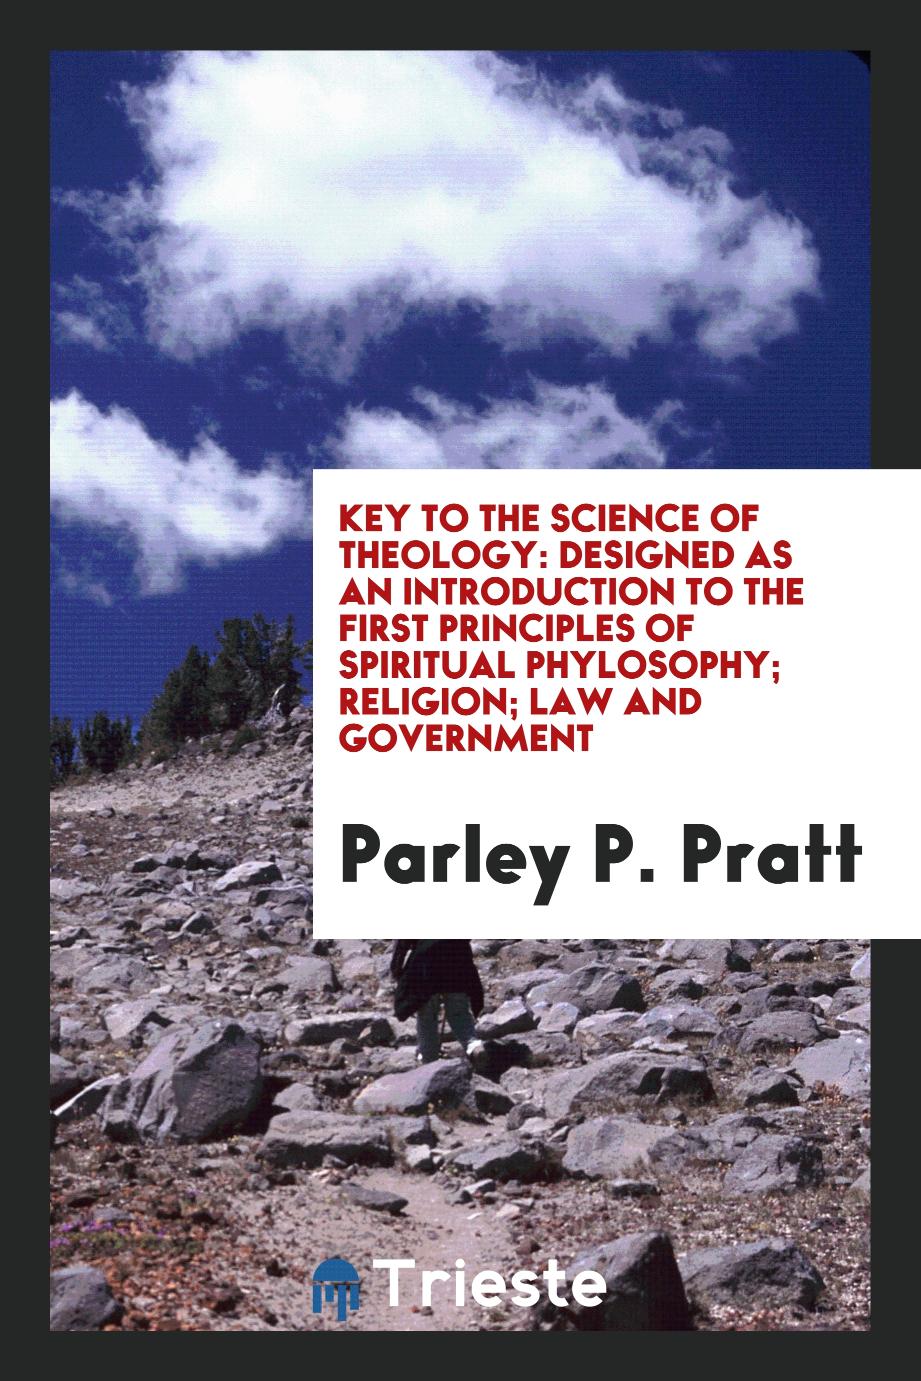 Key to the Science of Theology: Designed as an Introduction to the First Principles of Spiritual Phylosophy; Religion; Law and Government